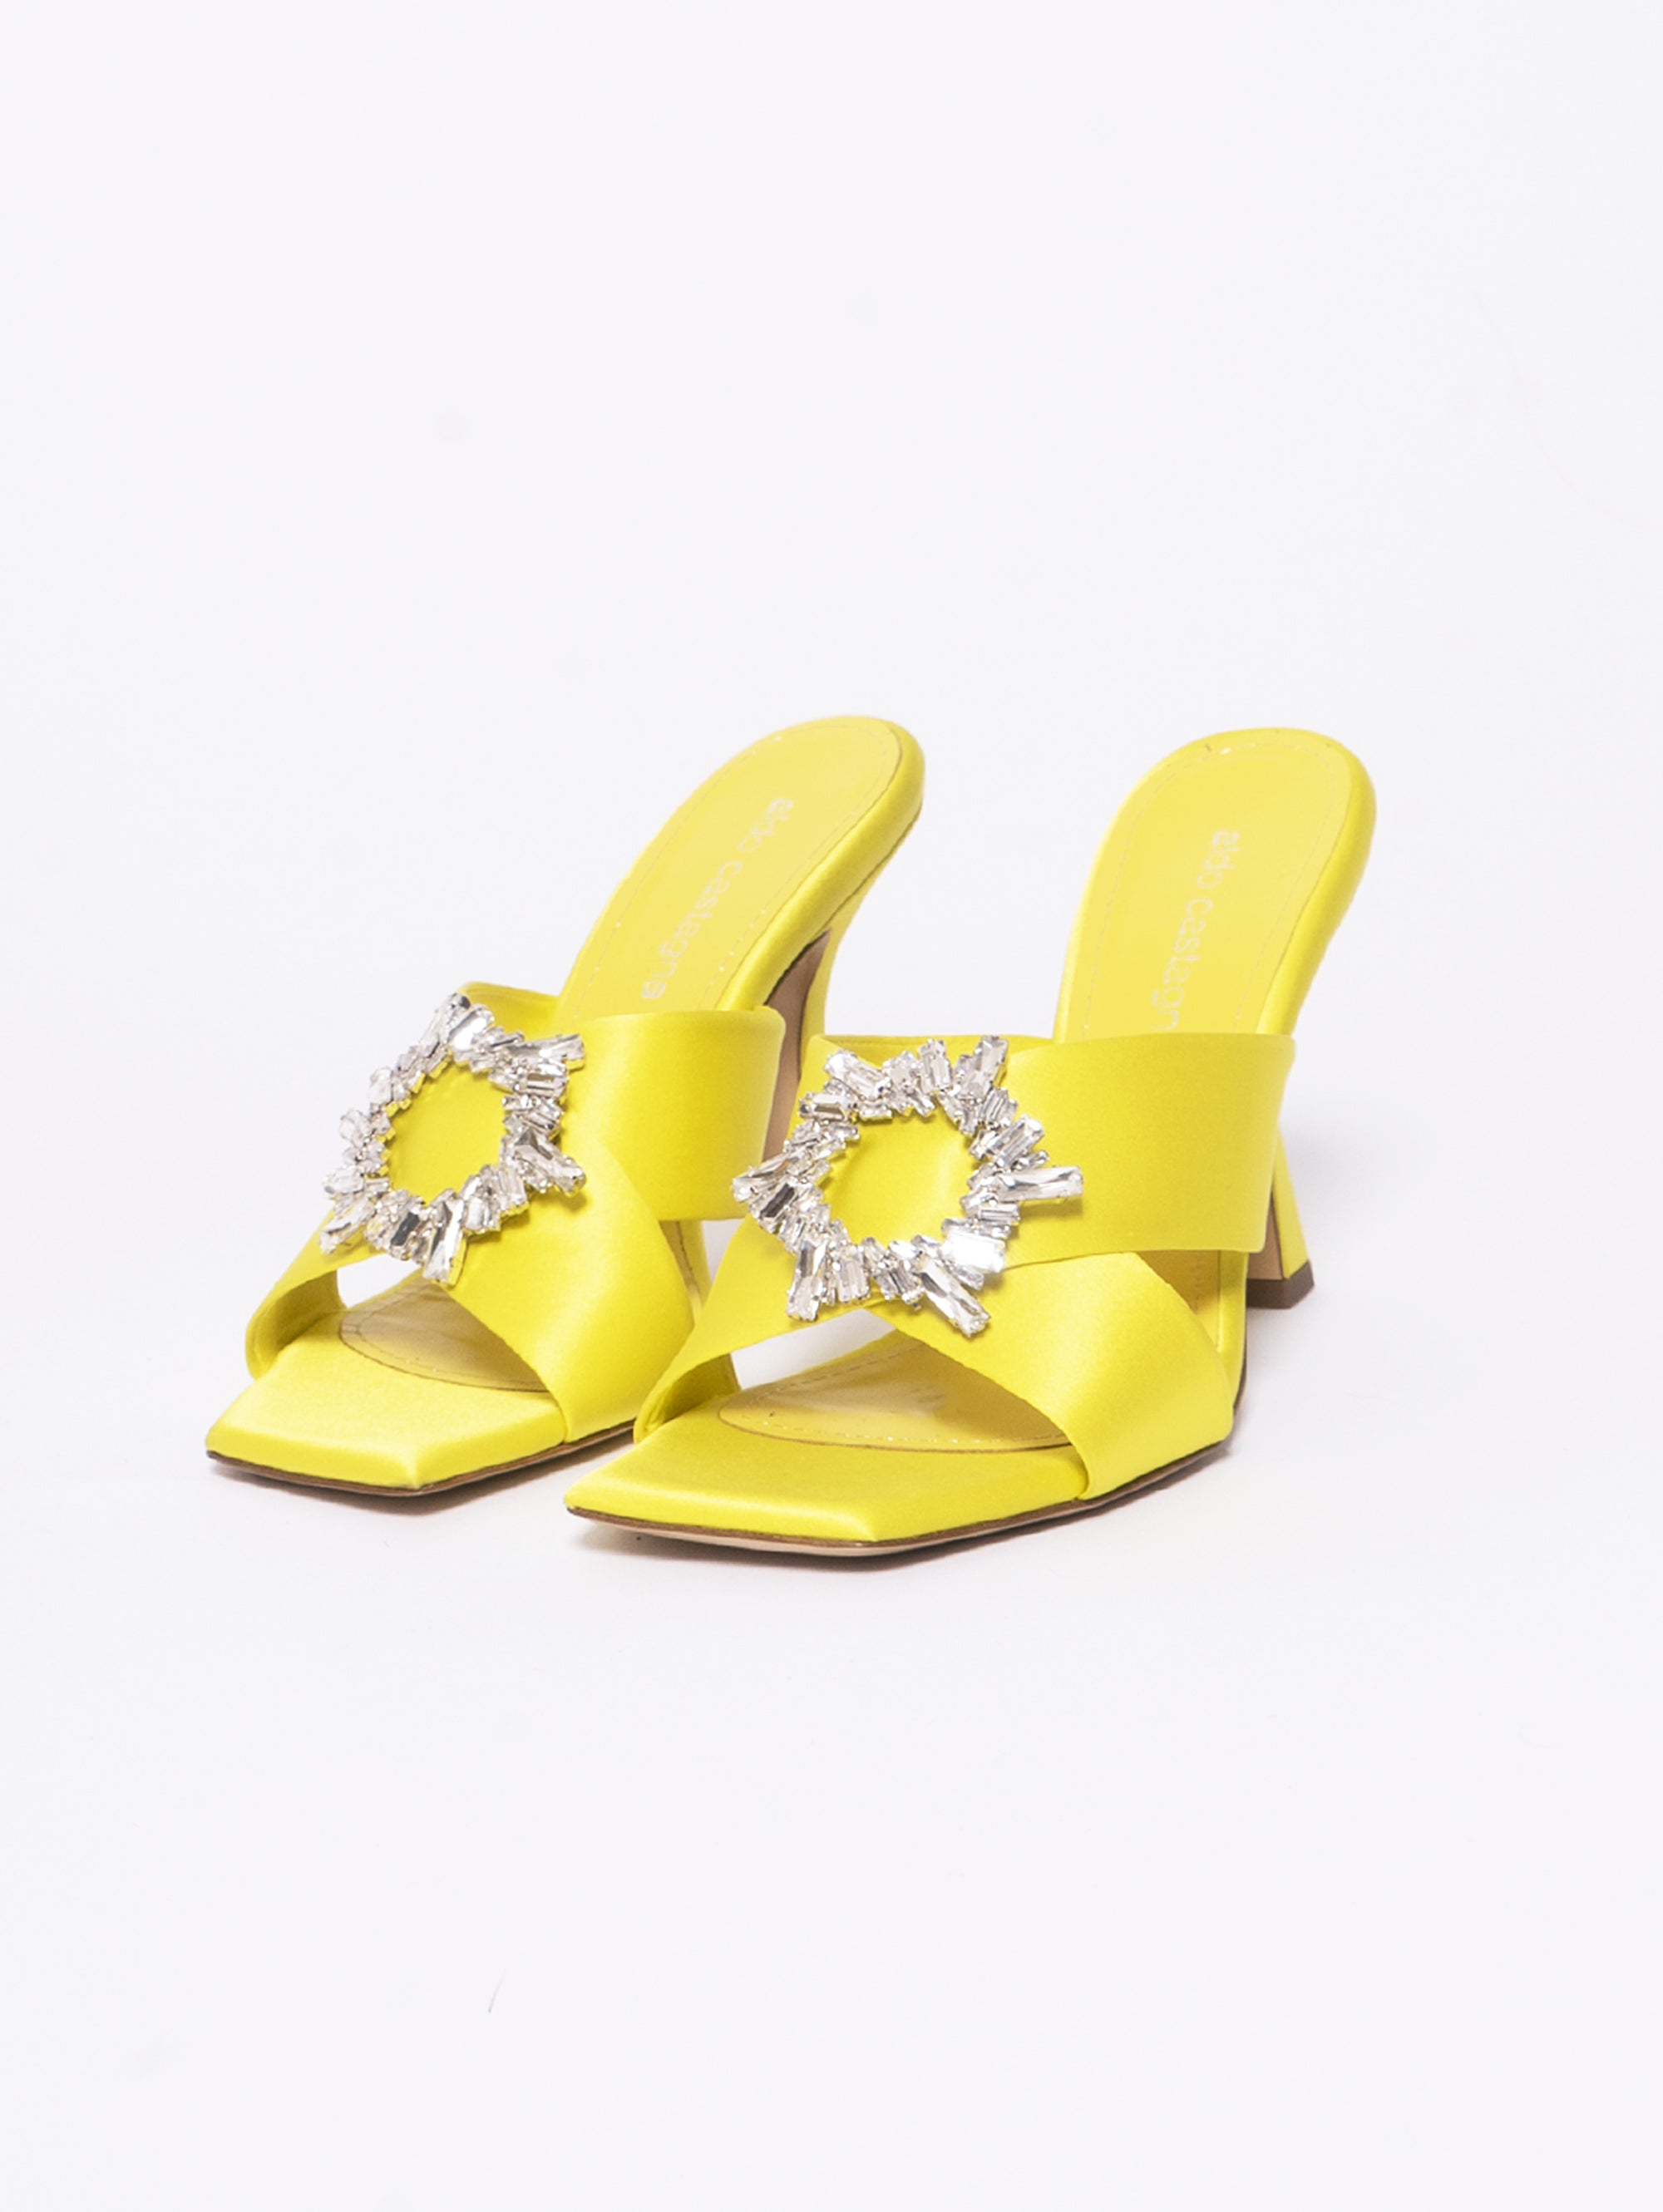 Square Sandals with Yellow Jewel